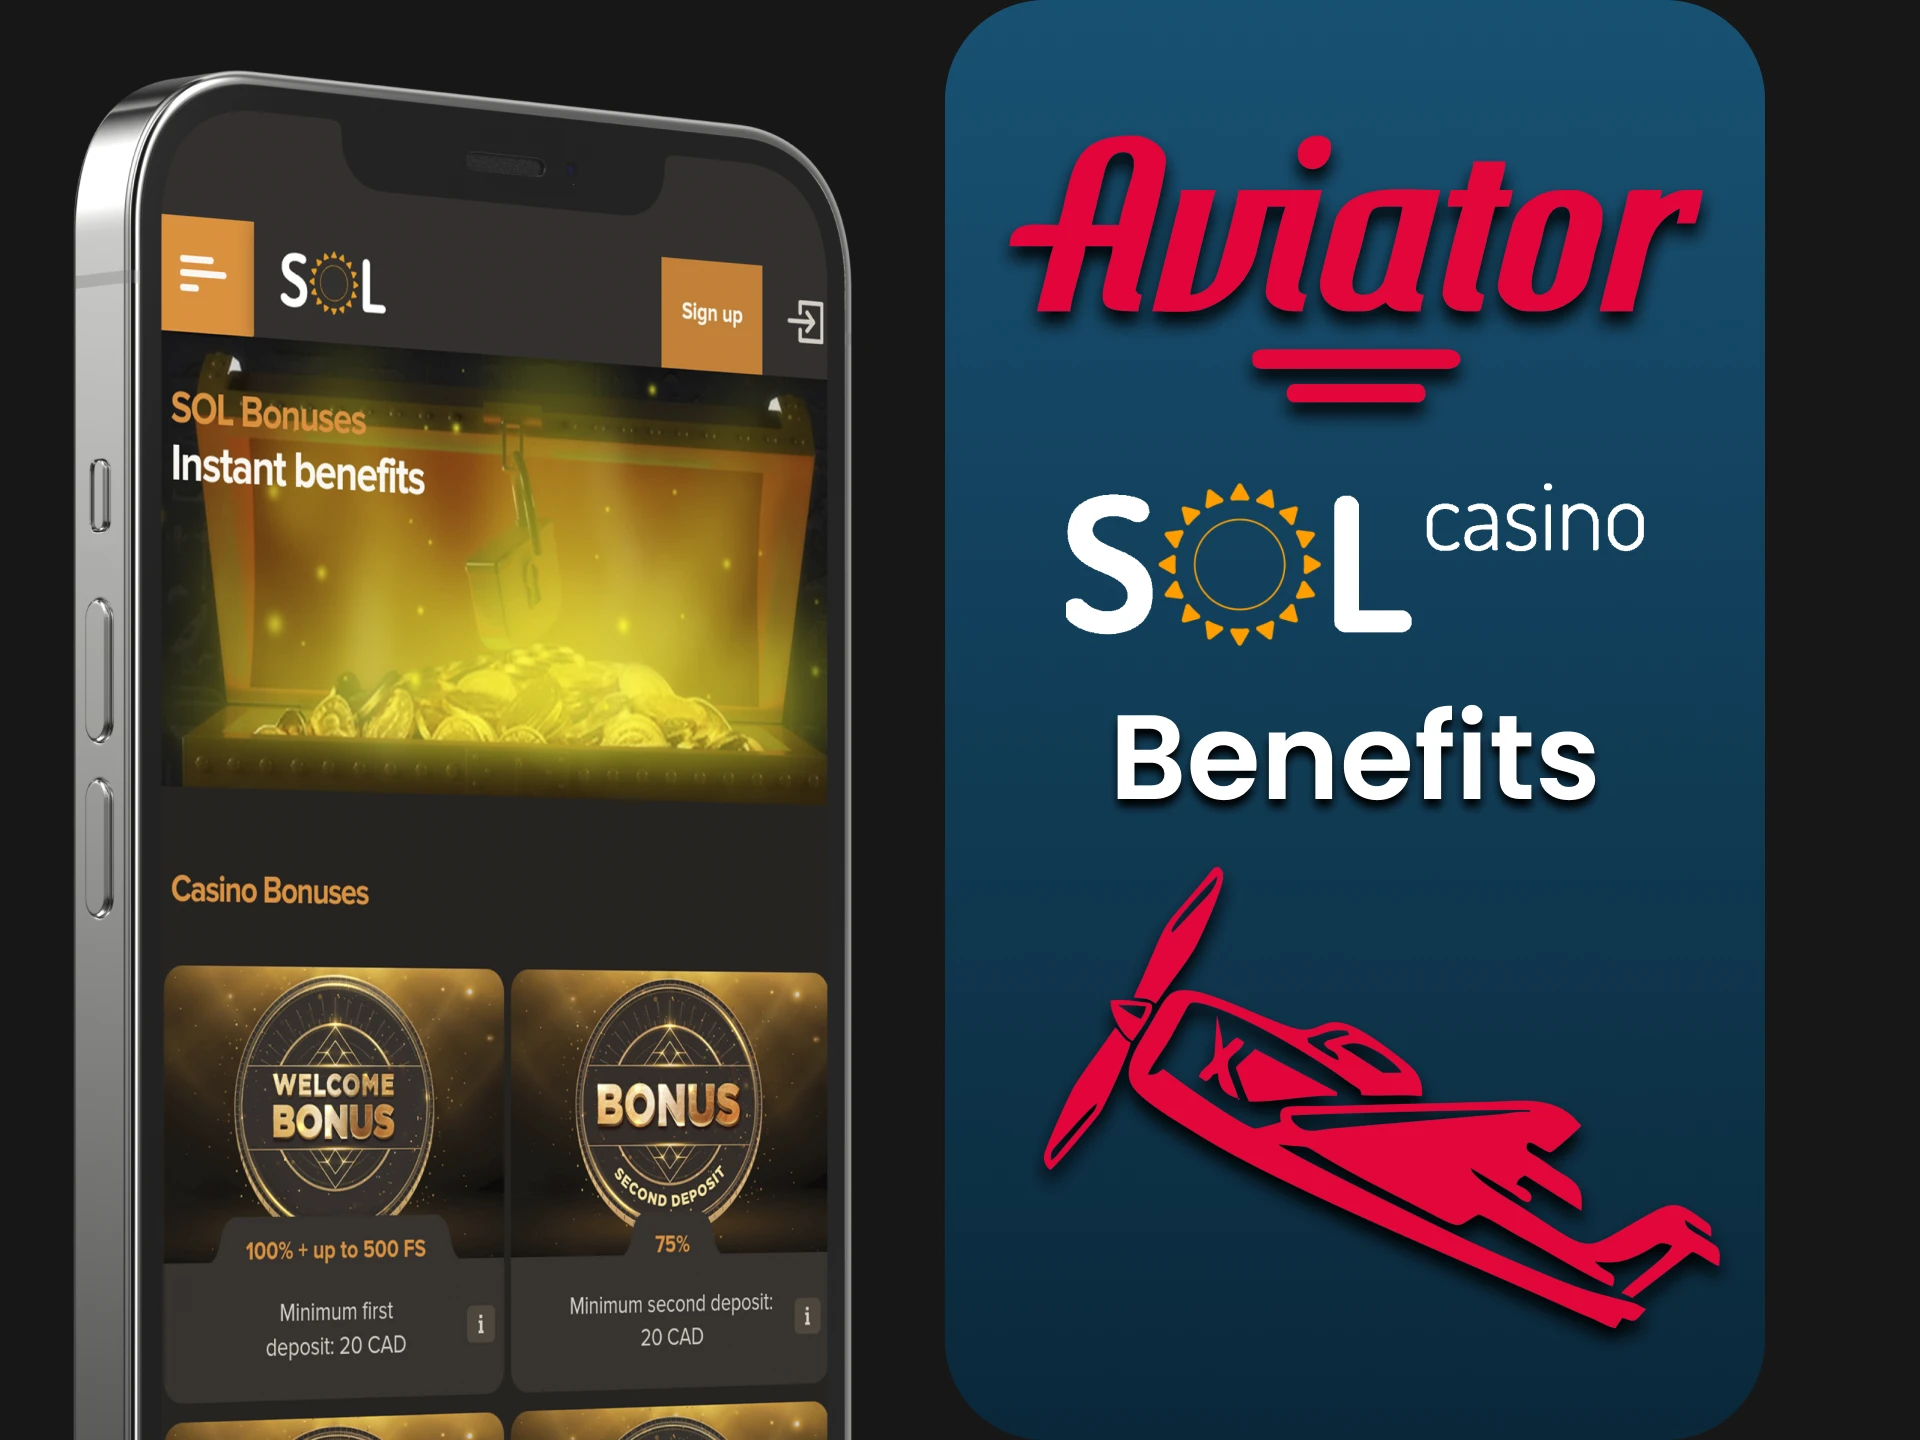 We will tell you about the advantages of the Sol Casino application for the Aviator game.